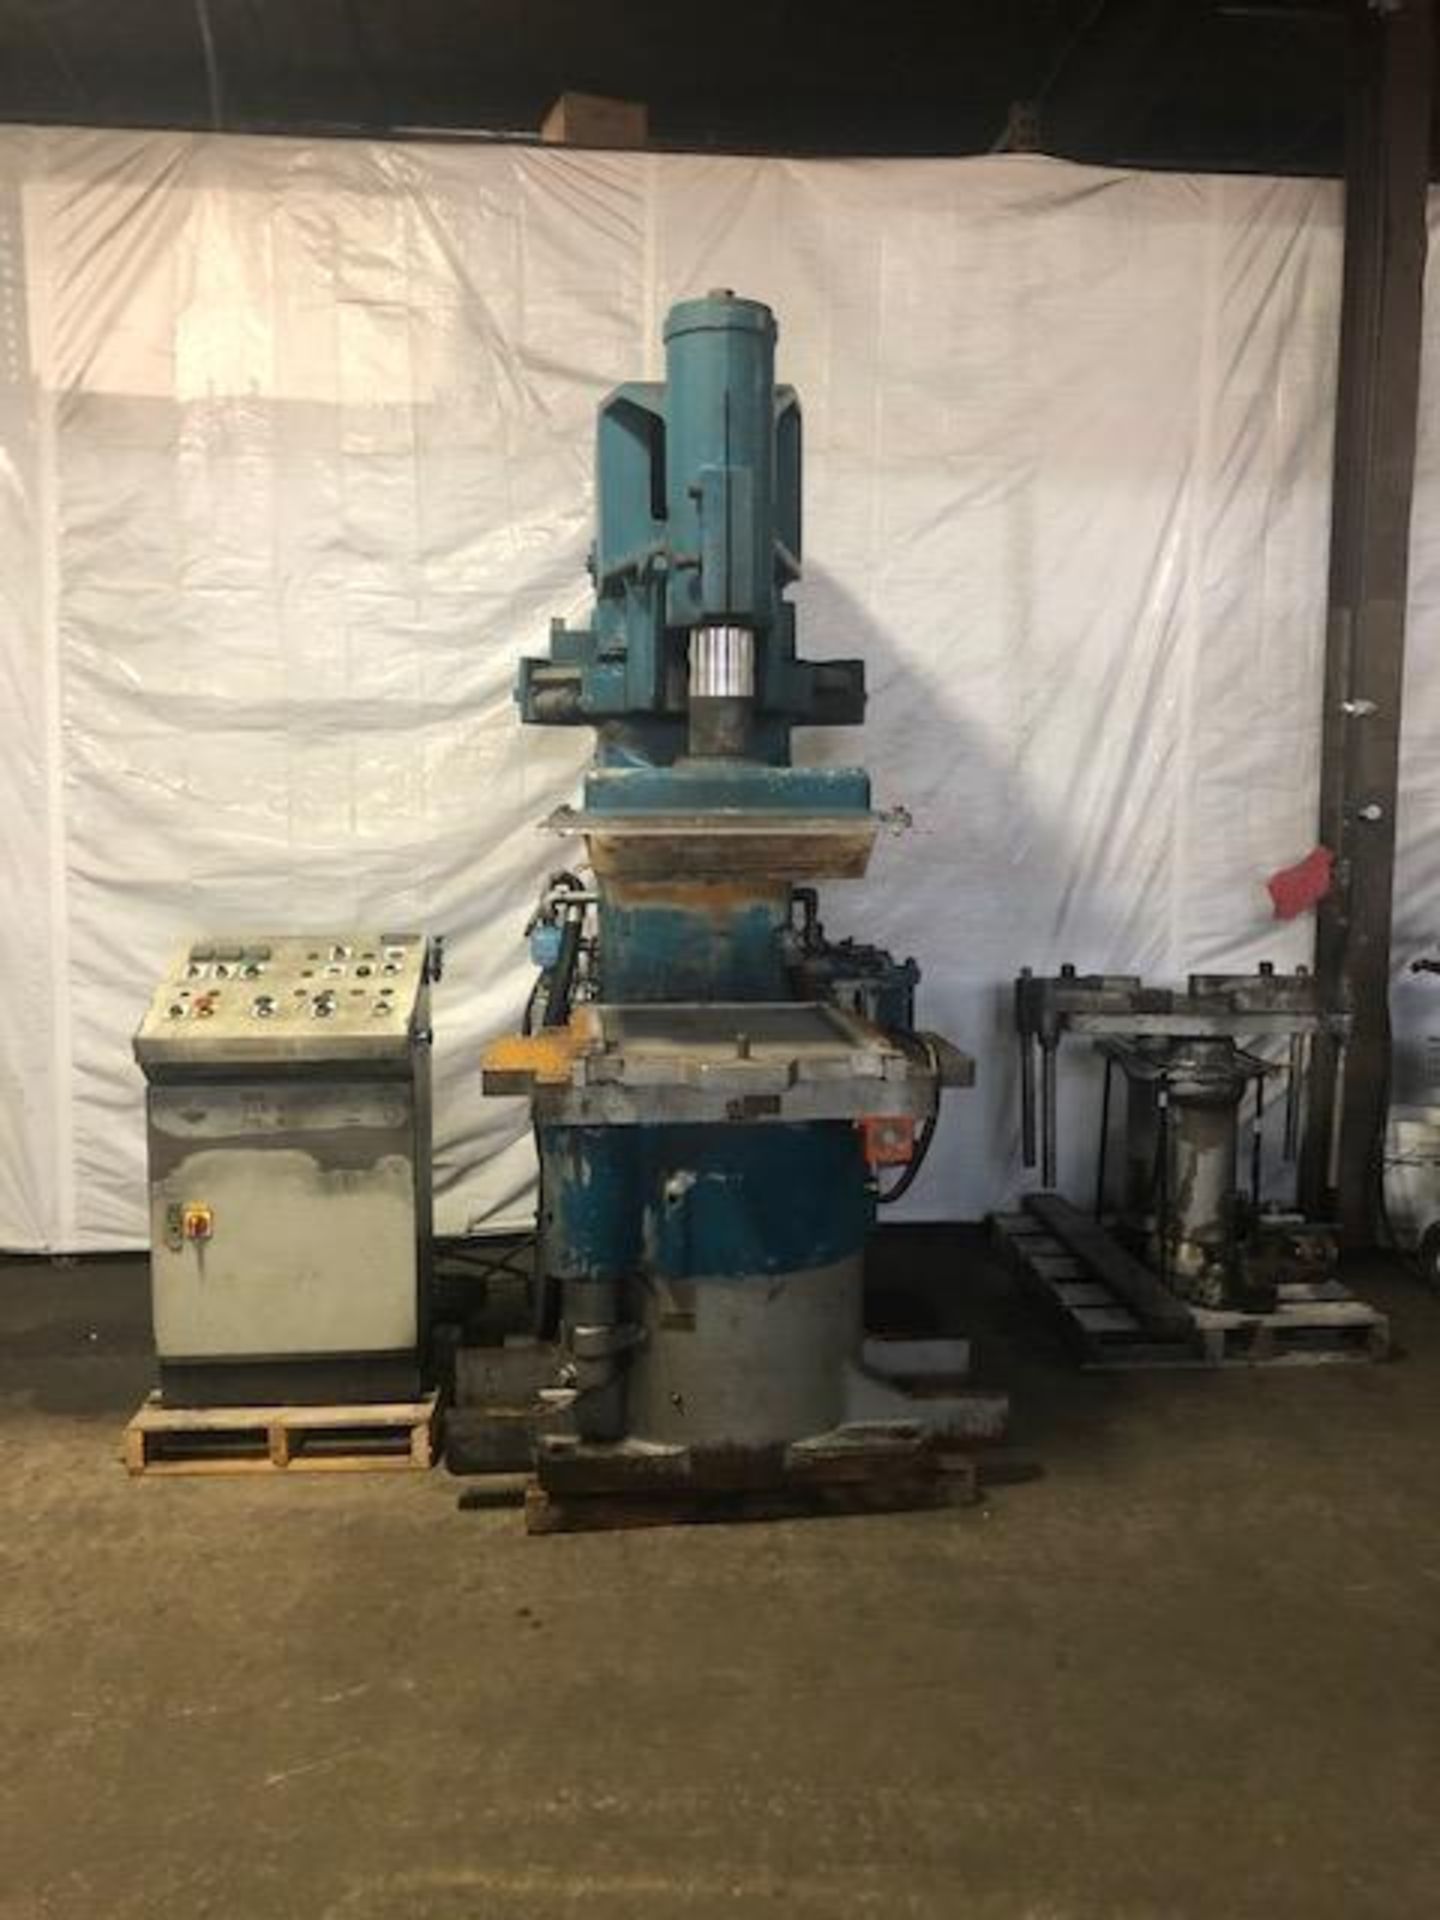 BMM MODEL QJS 222 MOLDING MACHINE S/N DH11259 WITH OMROM SYSMAC C20 PLC CONTROLS, VERY NICE